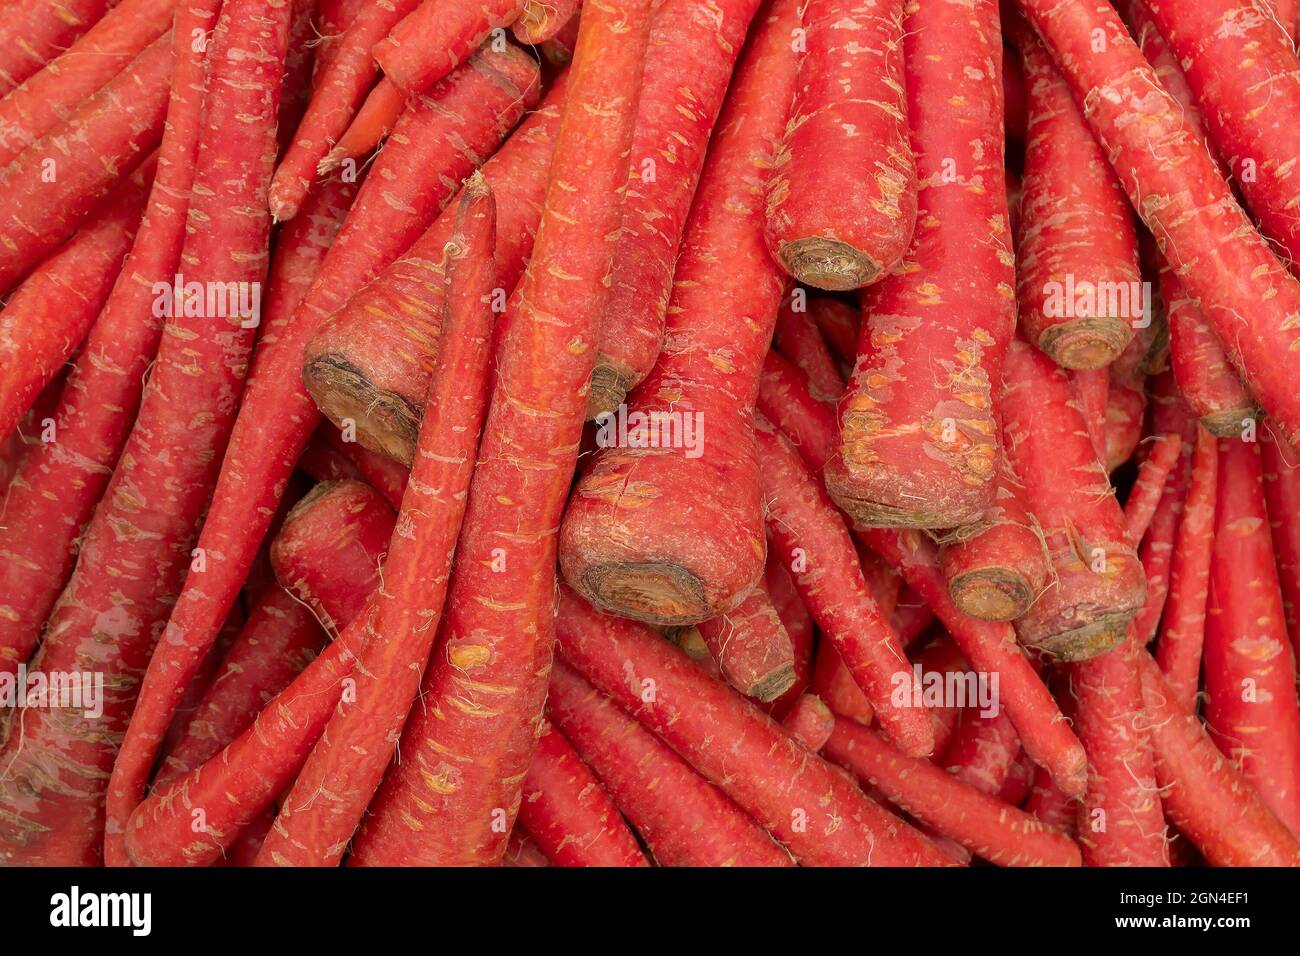 Carrot, Daucus carota , is a root vegetable, usually orange in colour, a domesticated form of the wild carrot. Vegetables for sale in a market in Terr Stock Photo